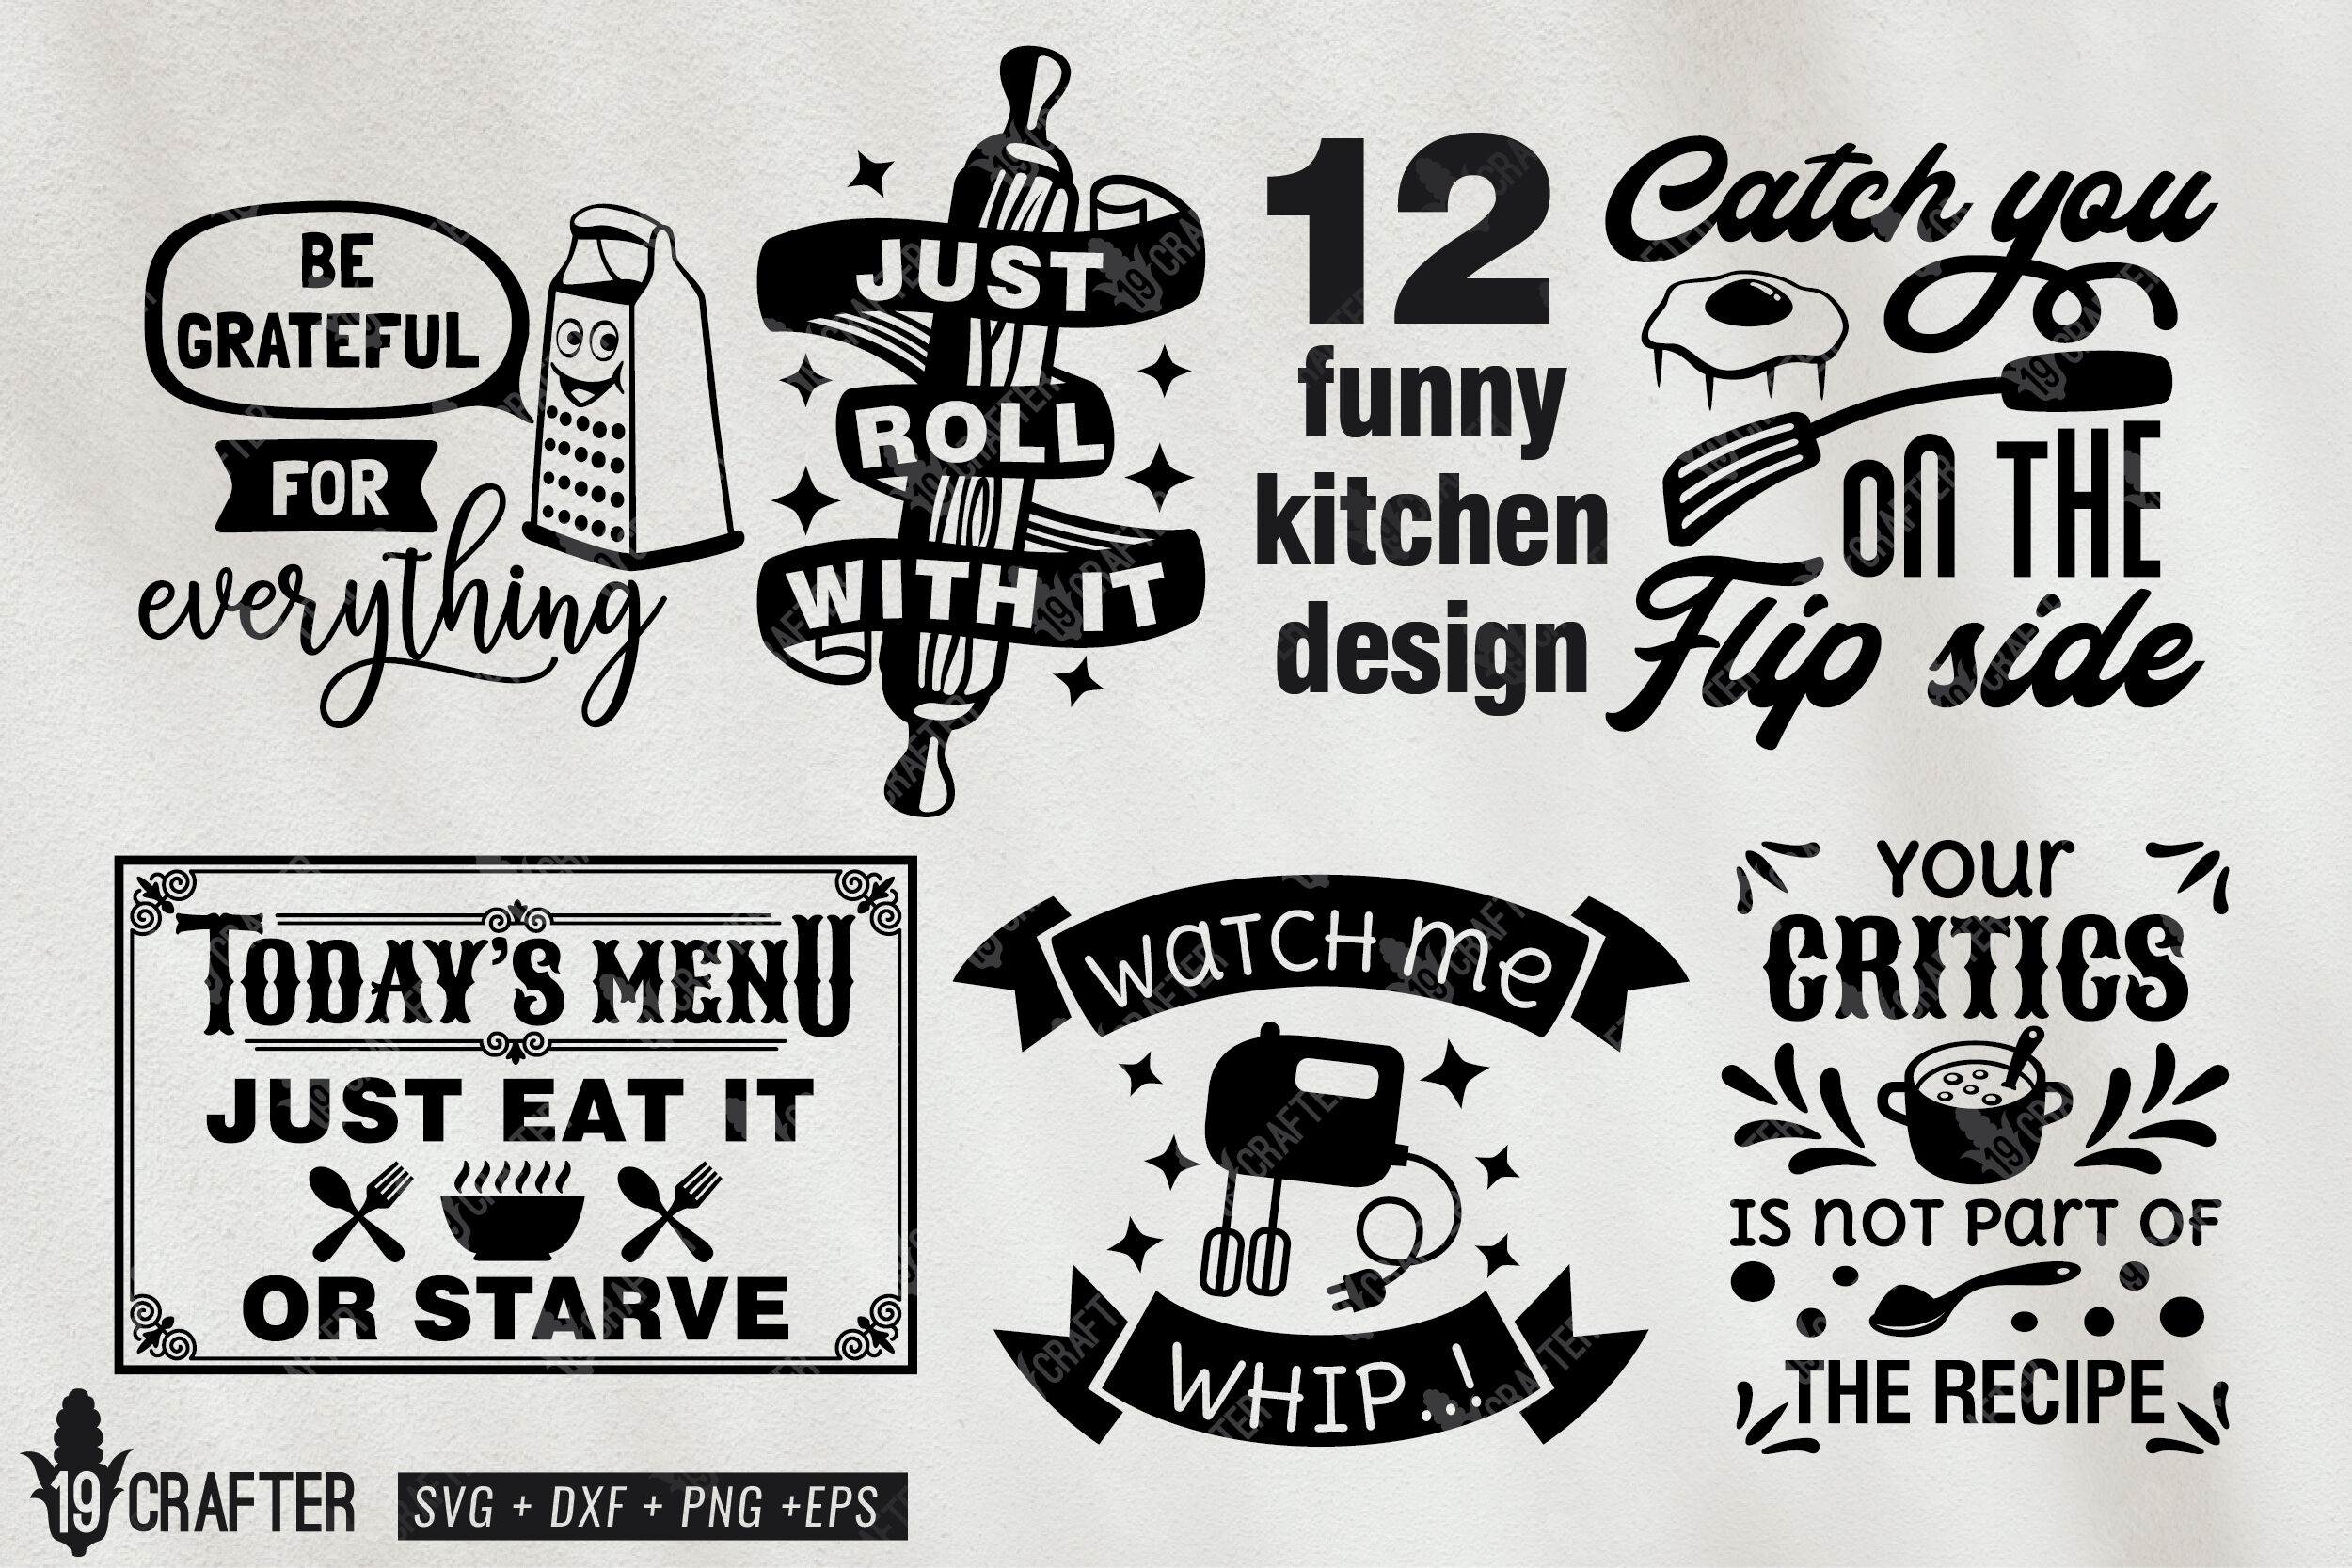 Funny Kitchen SVG Bundle, Kitchen SVG Bundle, Kitchen SVG Design,  SVGs,Quotes and Sayings,Food & Drink,On Sale, Print & Cut - So Fontsy